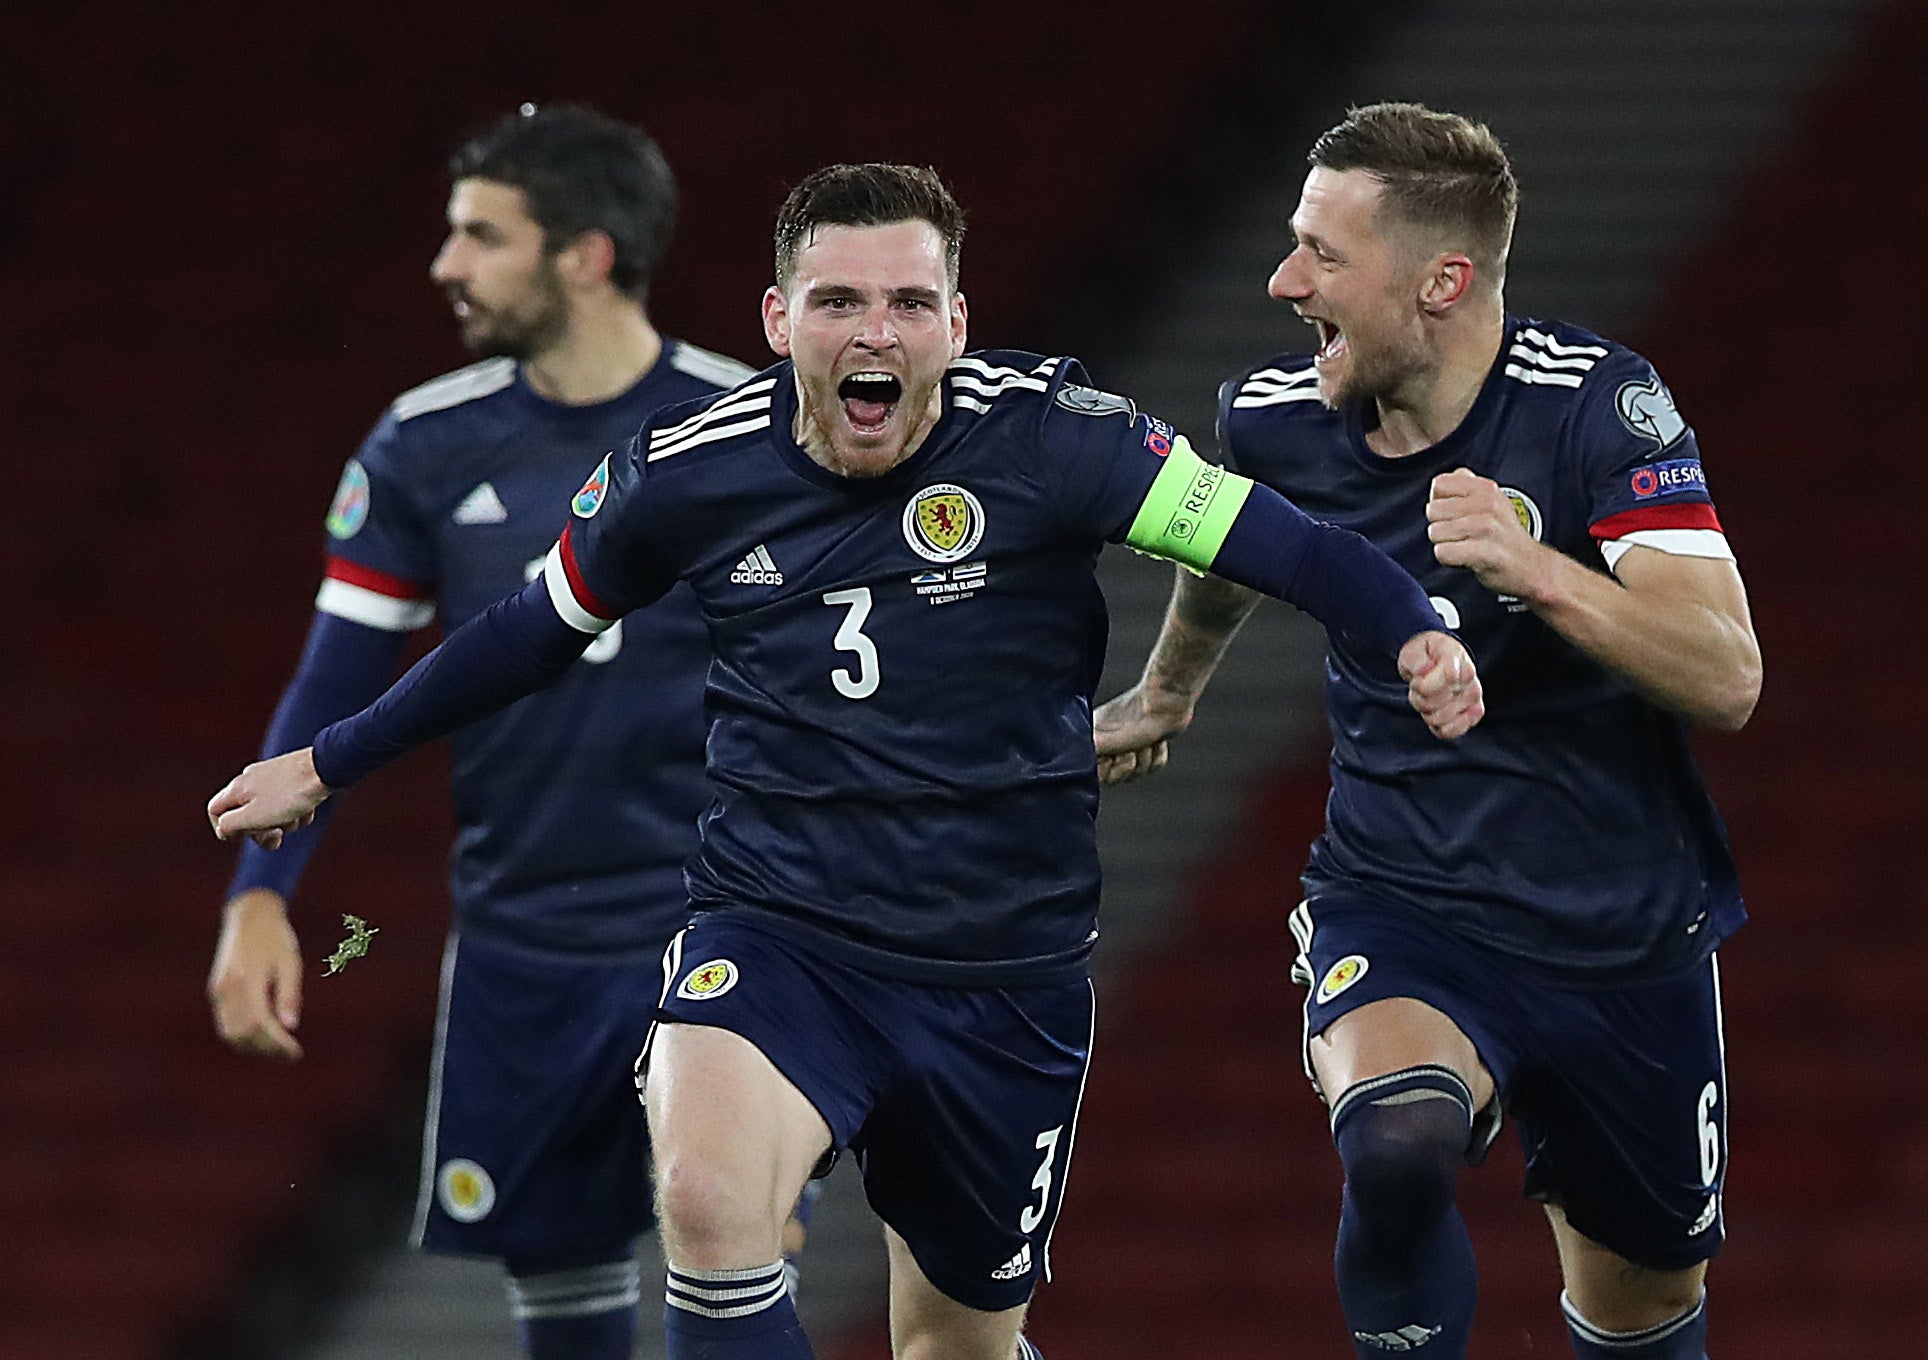 Scotland are ready for the biggest game in a generation